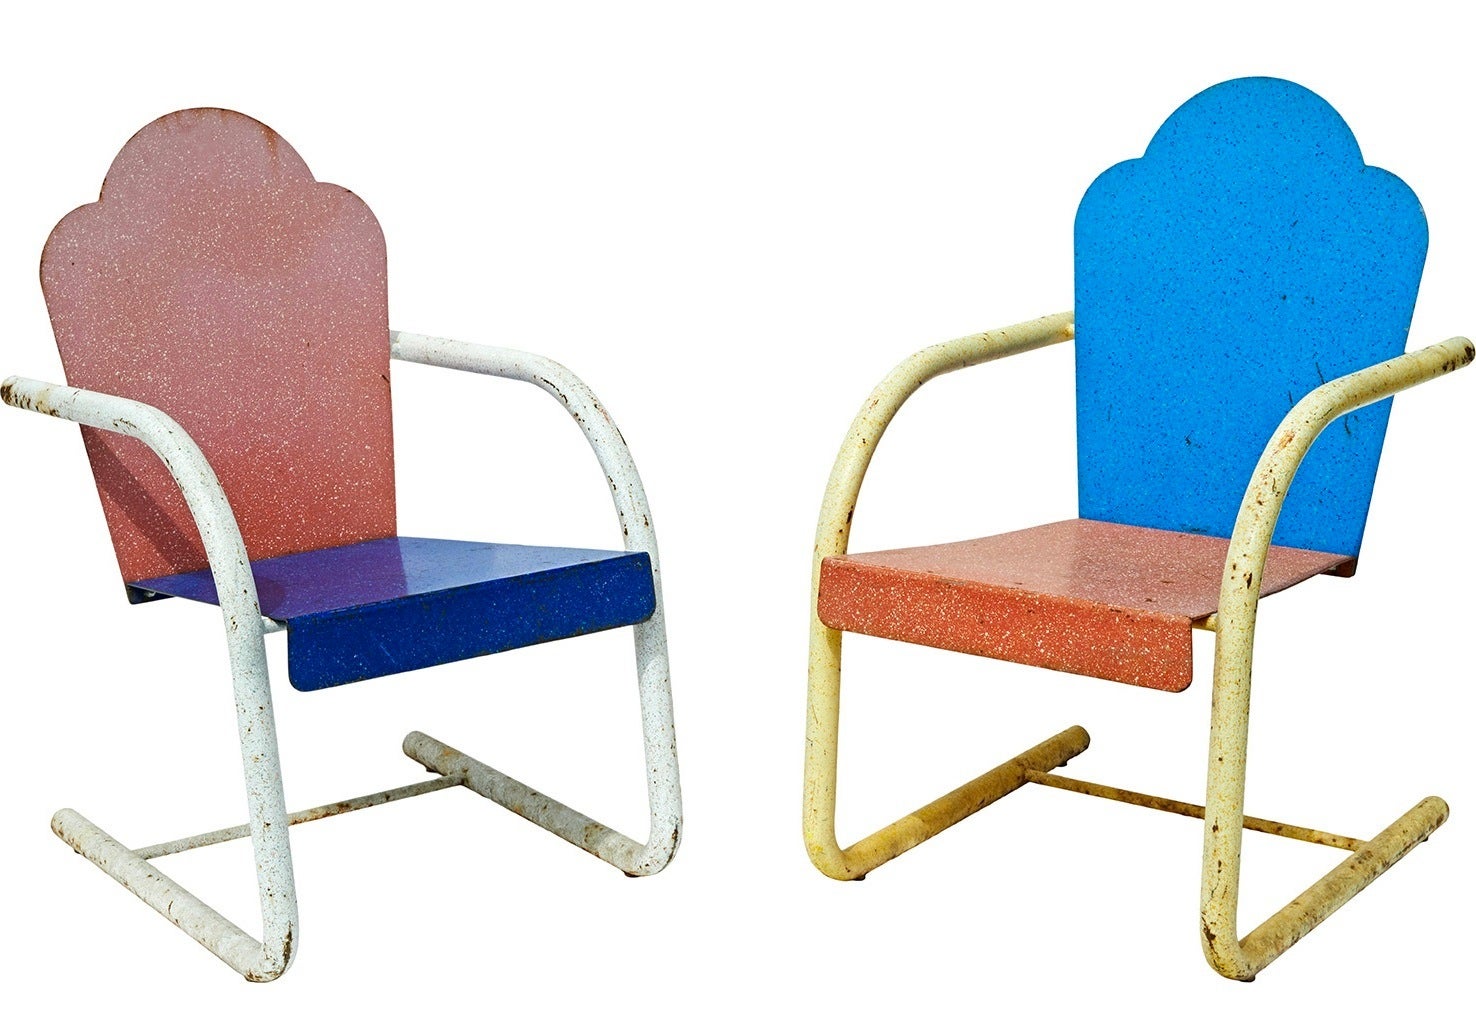 Rare Chairs by Peter Shire